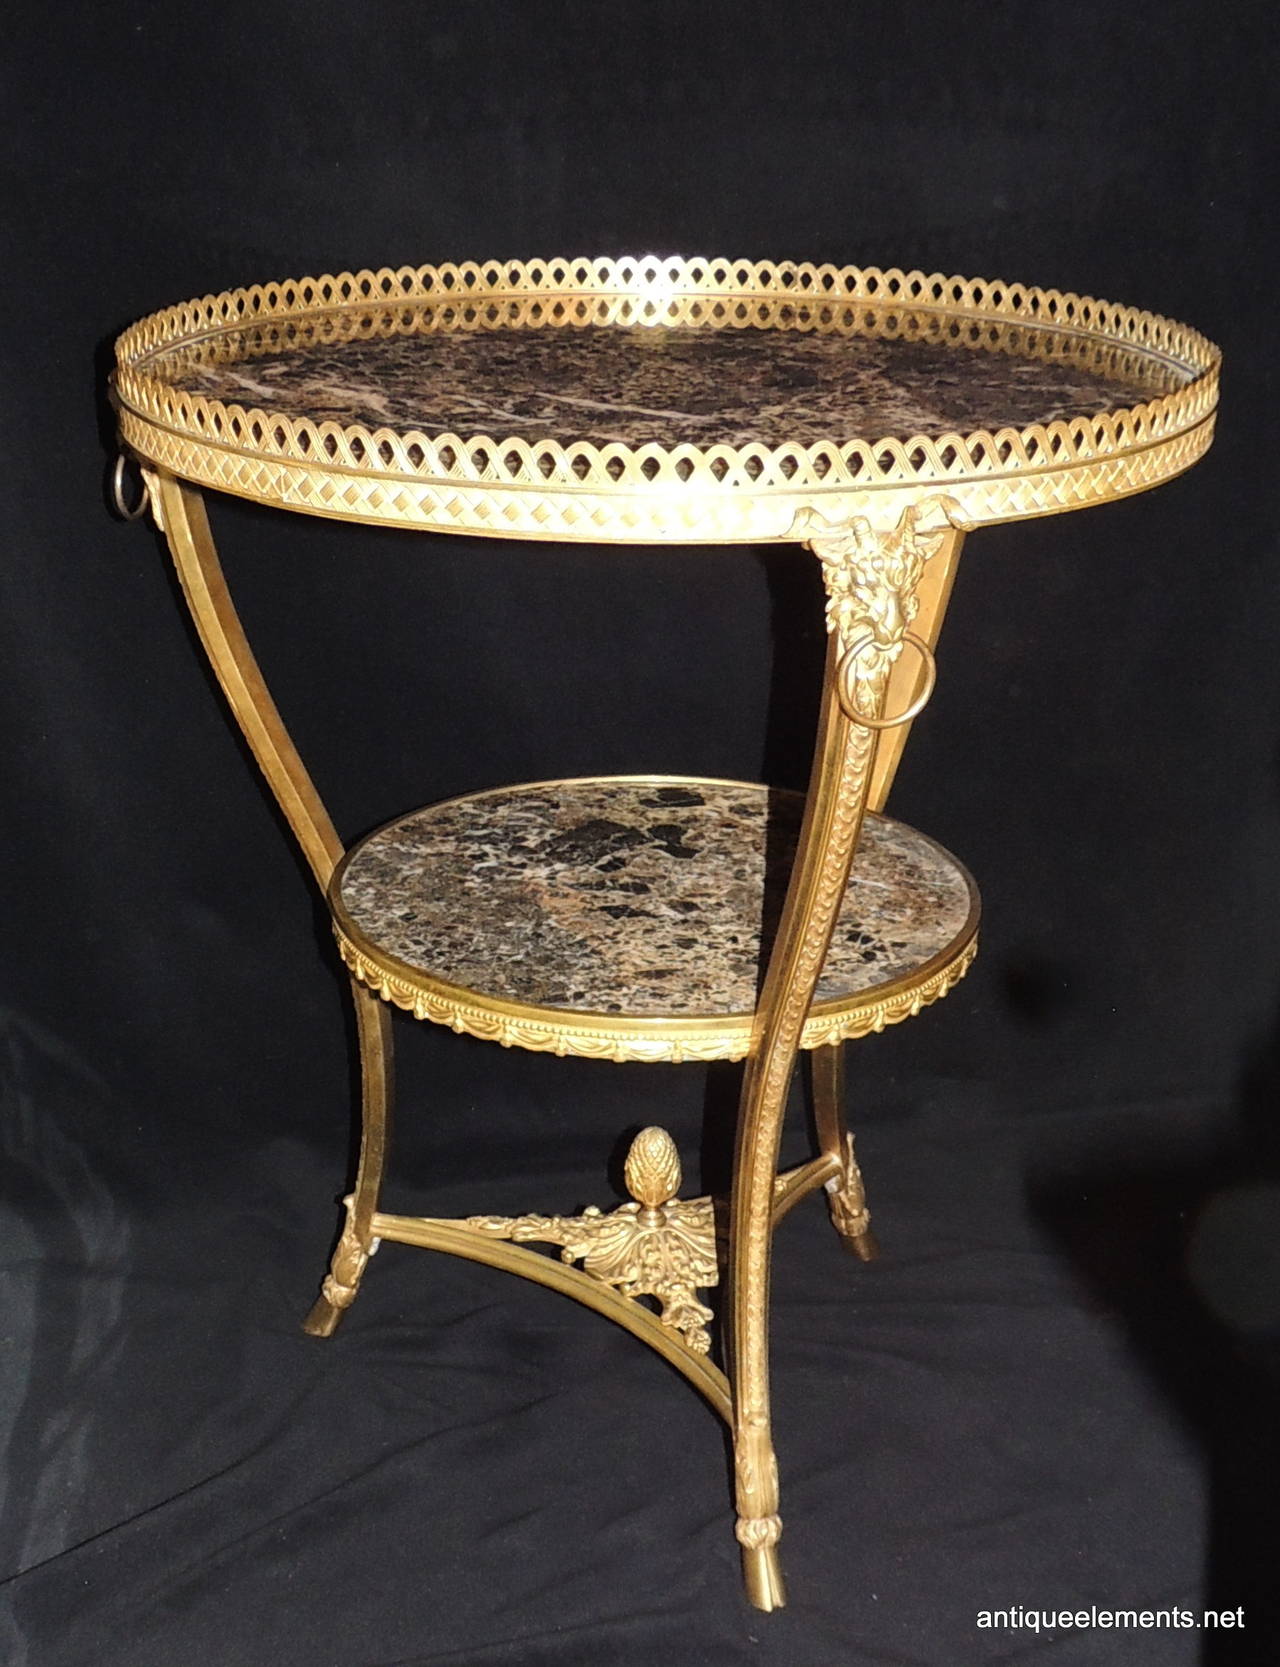 This beautiful Gueridon table has everything going for it. From the wonderful dore bronze detailing with braided engraving and pierced trim surrounding each level to the beautiful acorn center at the bottom on a bed of leaves. The three legs are